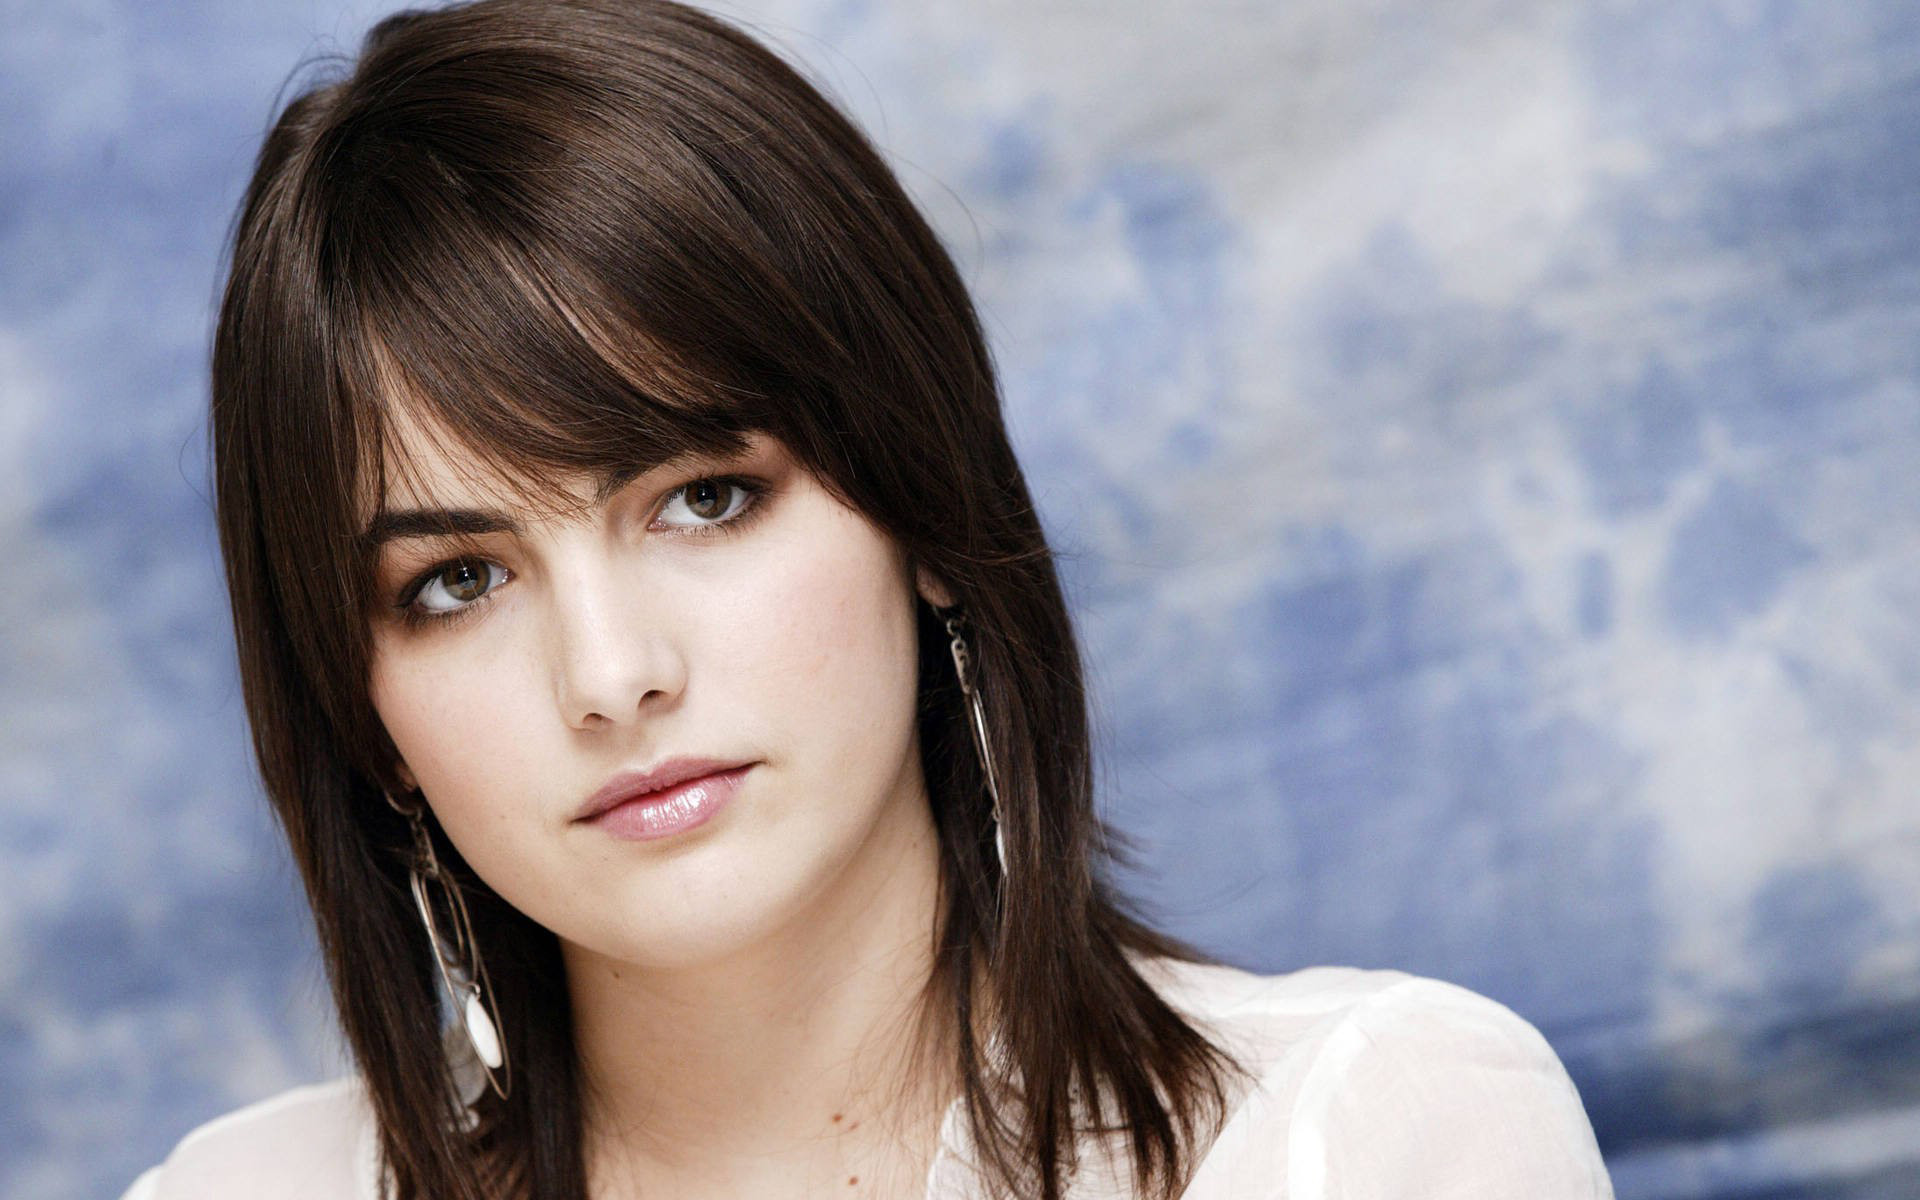 Wallpapers of Camilla Belle (57+ pictures)